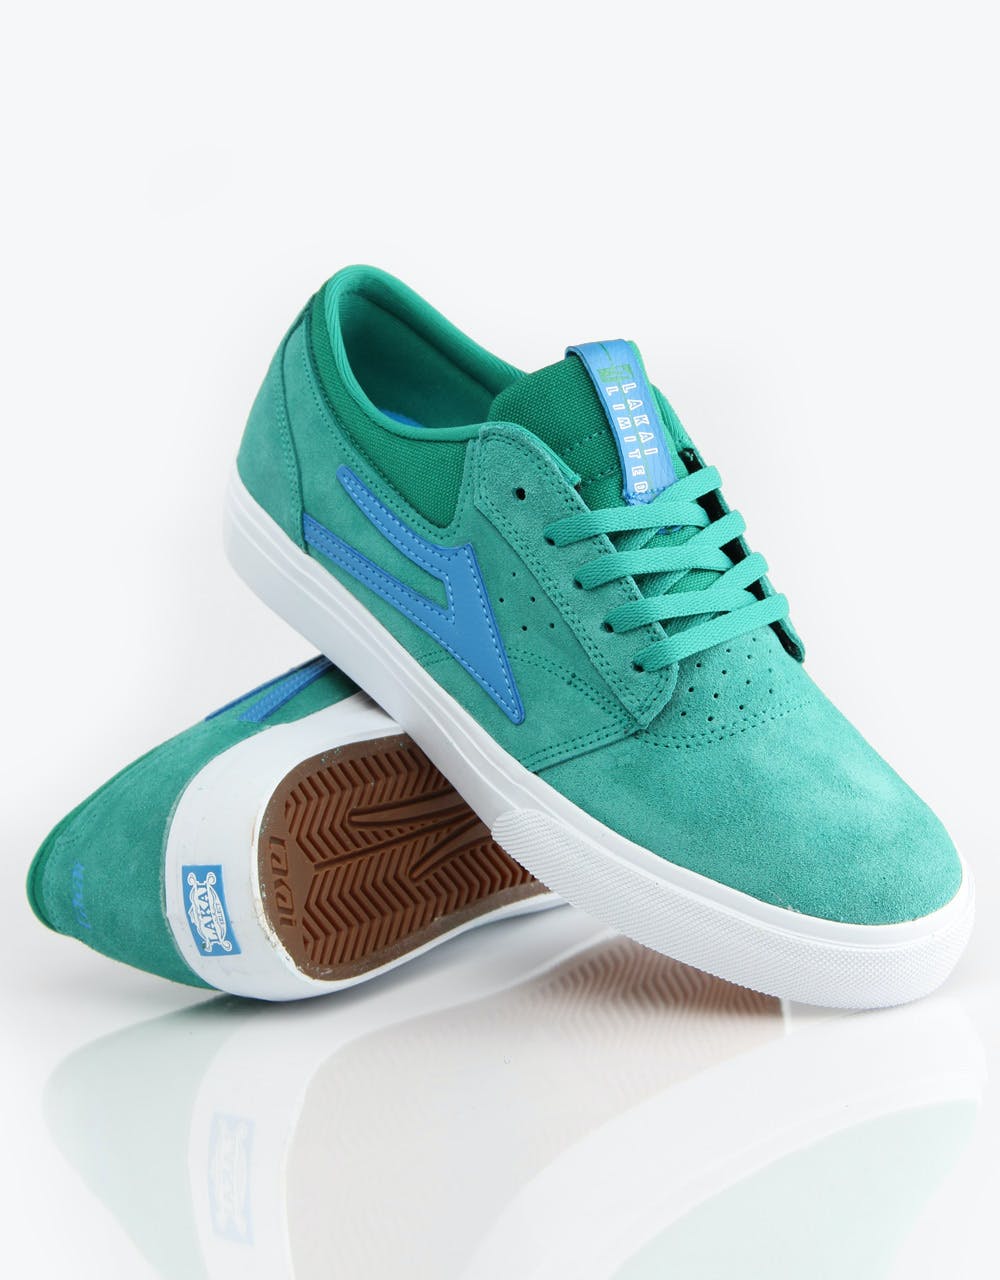 Lakai Griffin Skate Shoes - Green/Blue/Suede